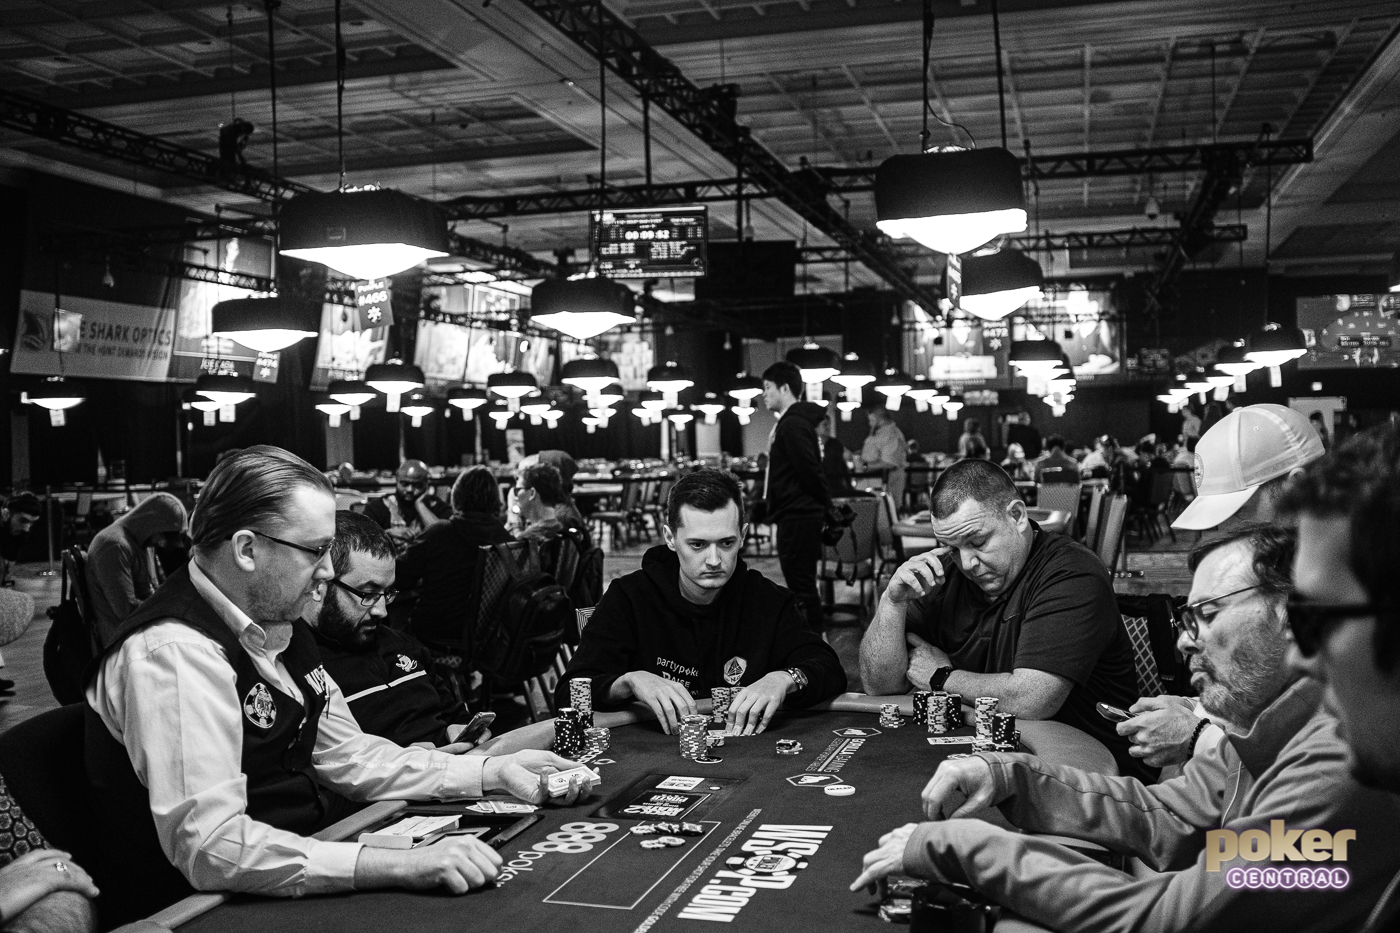 Nick Marchington in action during Day 6 of the 2019 WSOP Main Event.